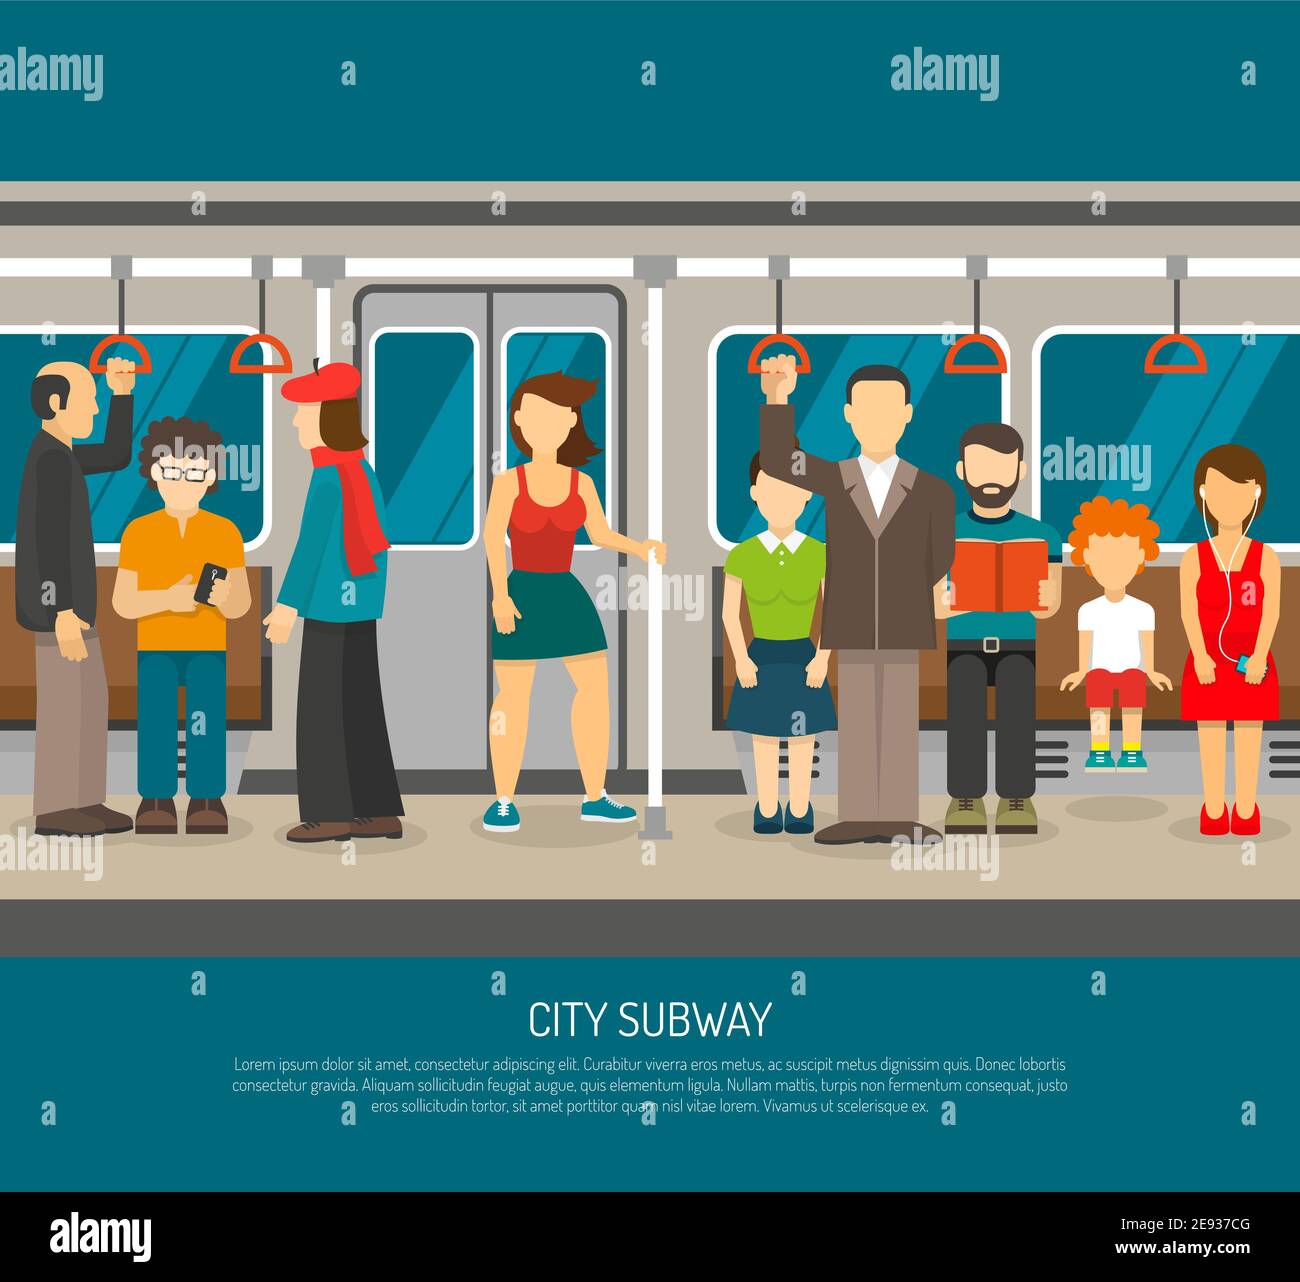 Subway poster of scene inside underground train carriage with crowd of sitting and standing passengers flat vector illustration Stock Vector